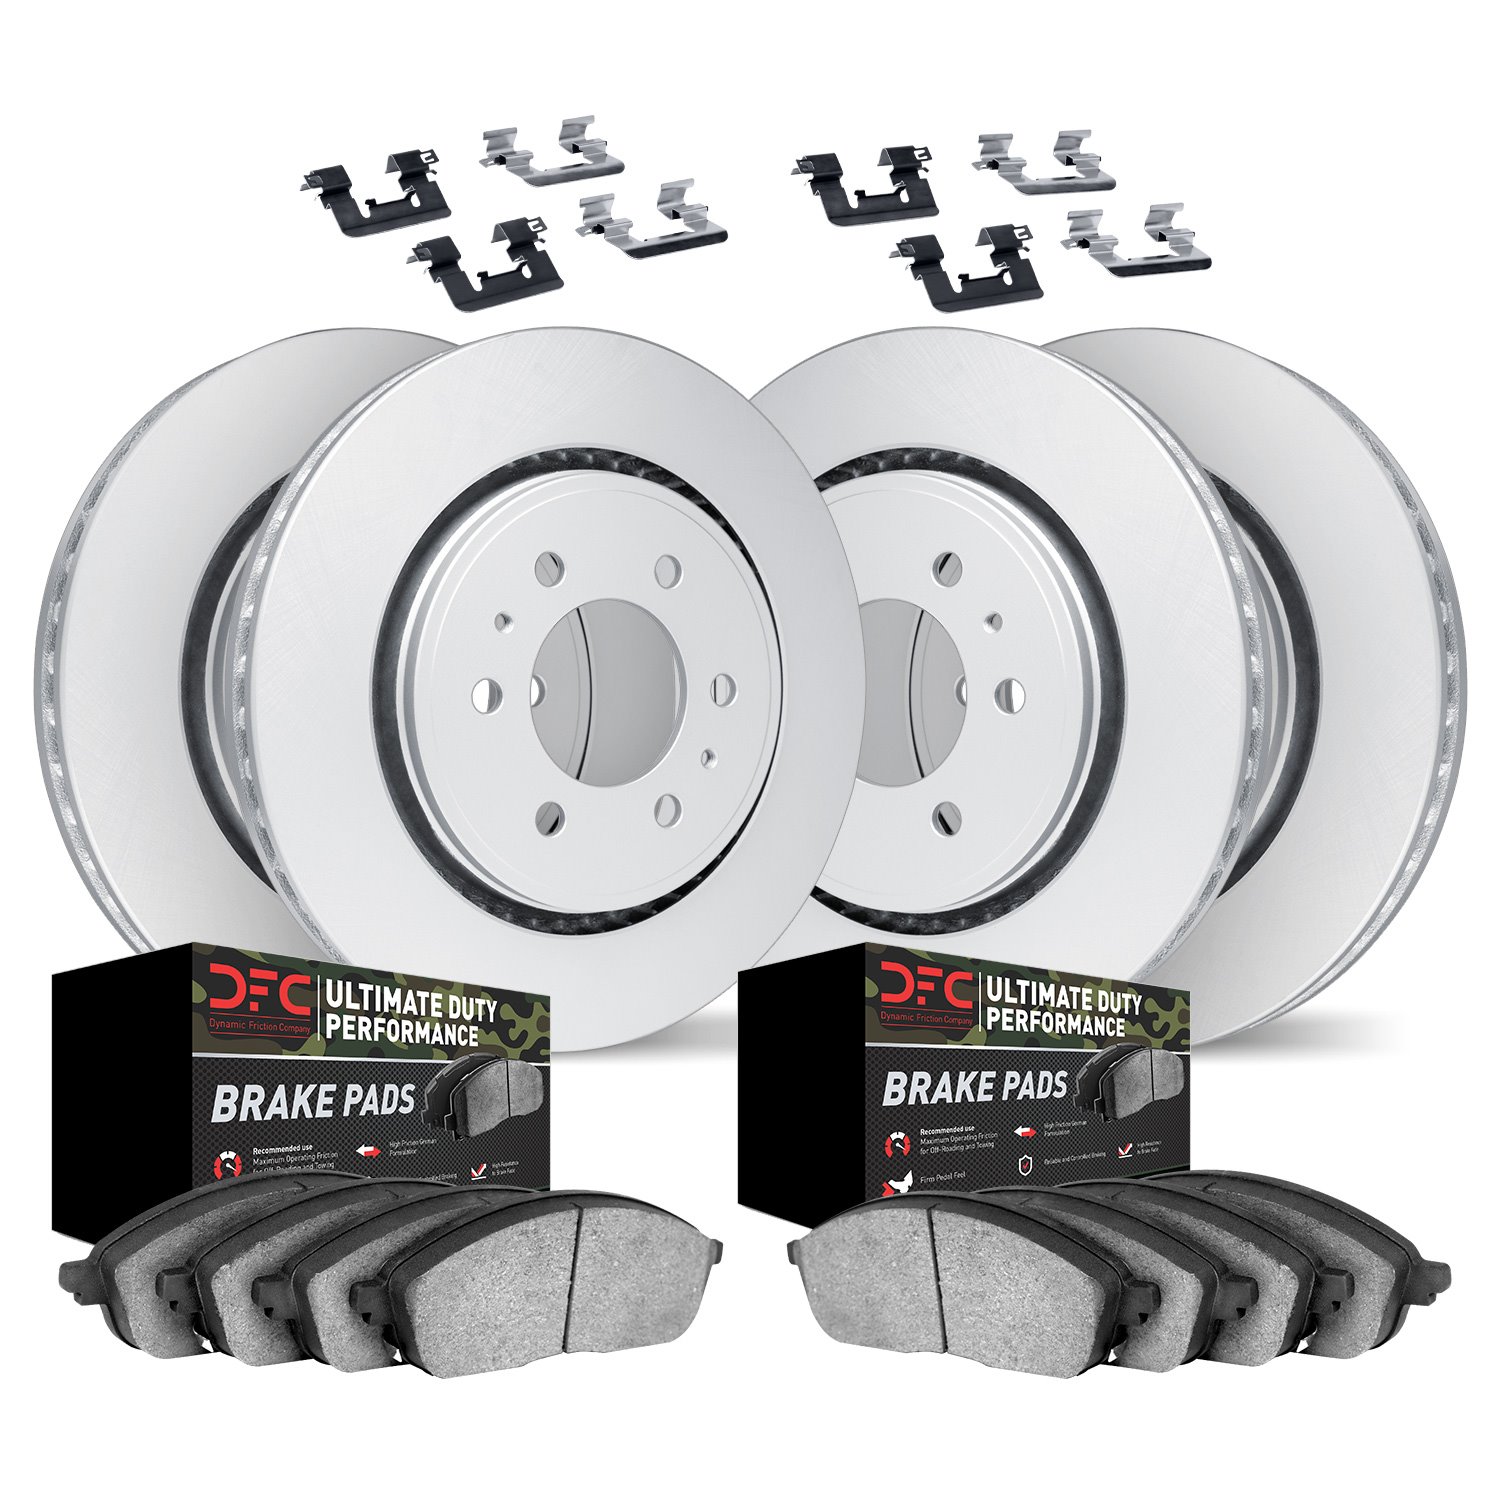 4414-67007 Geospec Brake Rotors with Ultimate-Duty Brake Pads & Hardware, Fits Select Infiniti/Nissan, Position: Front and Rear